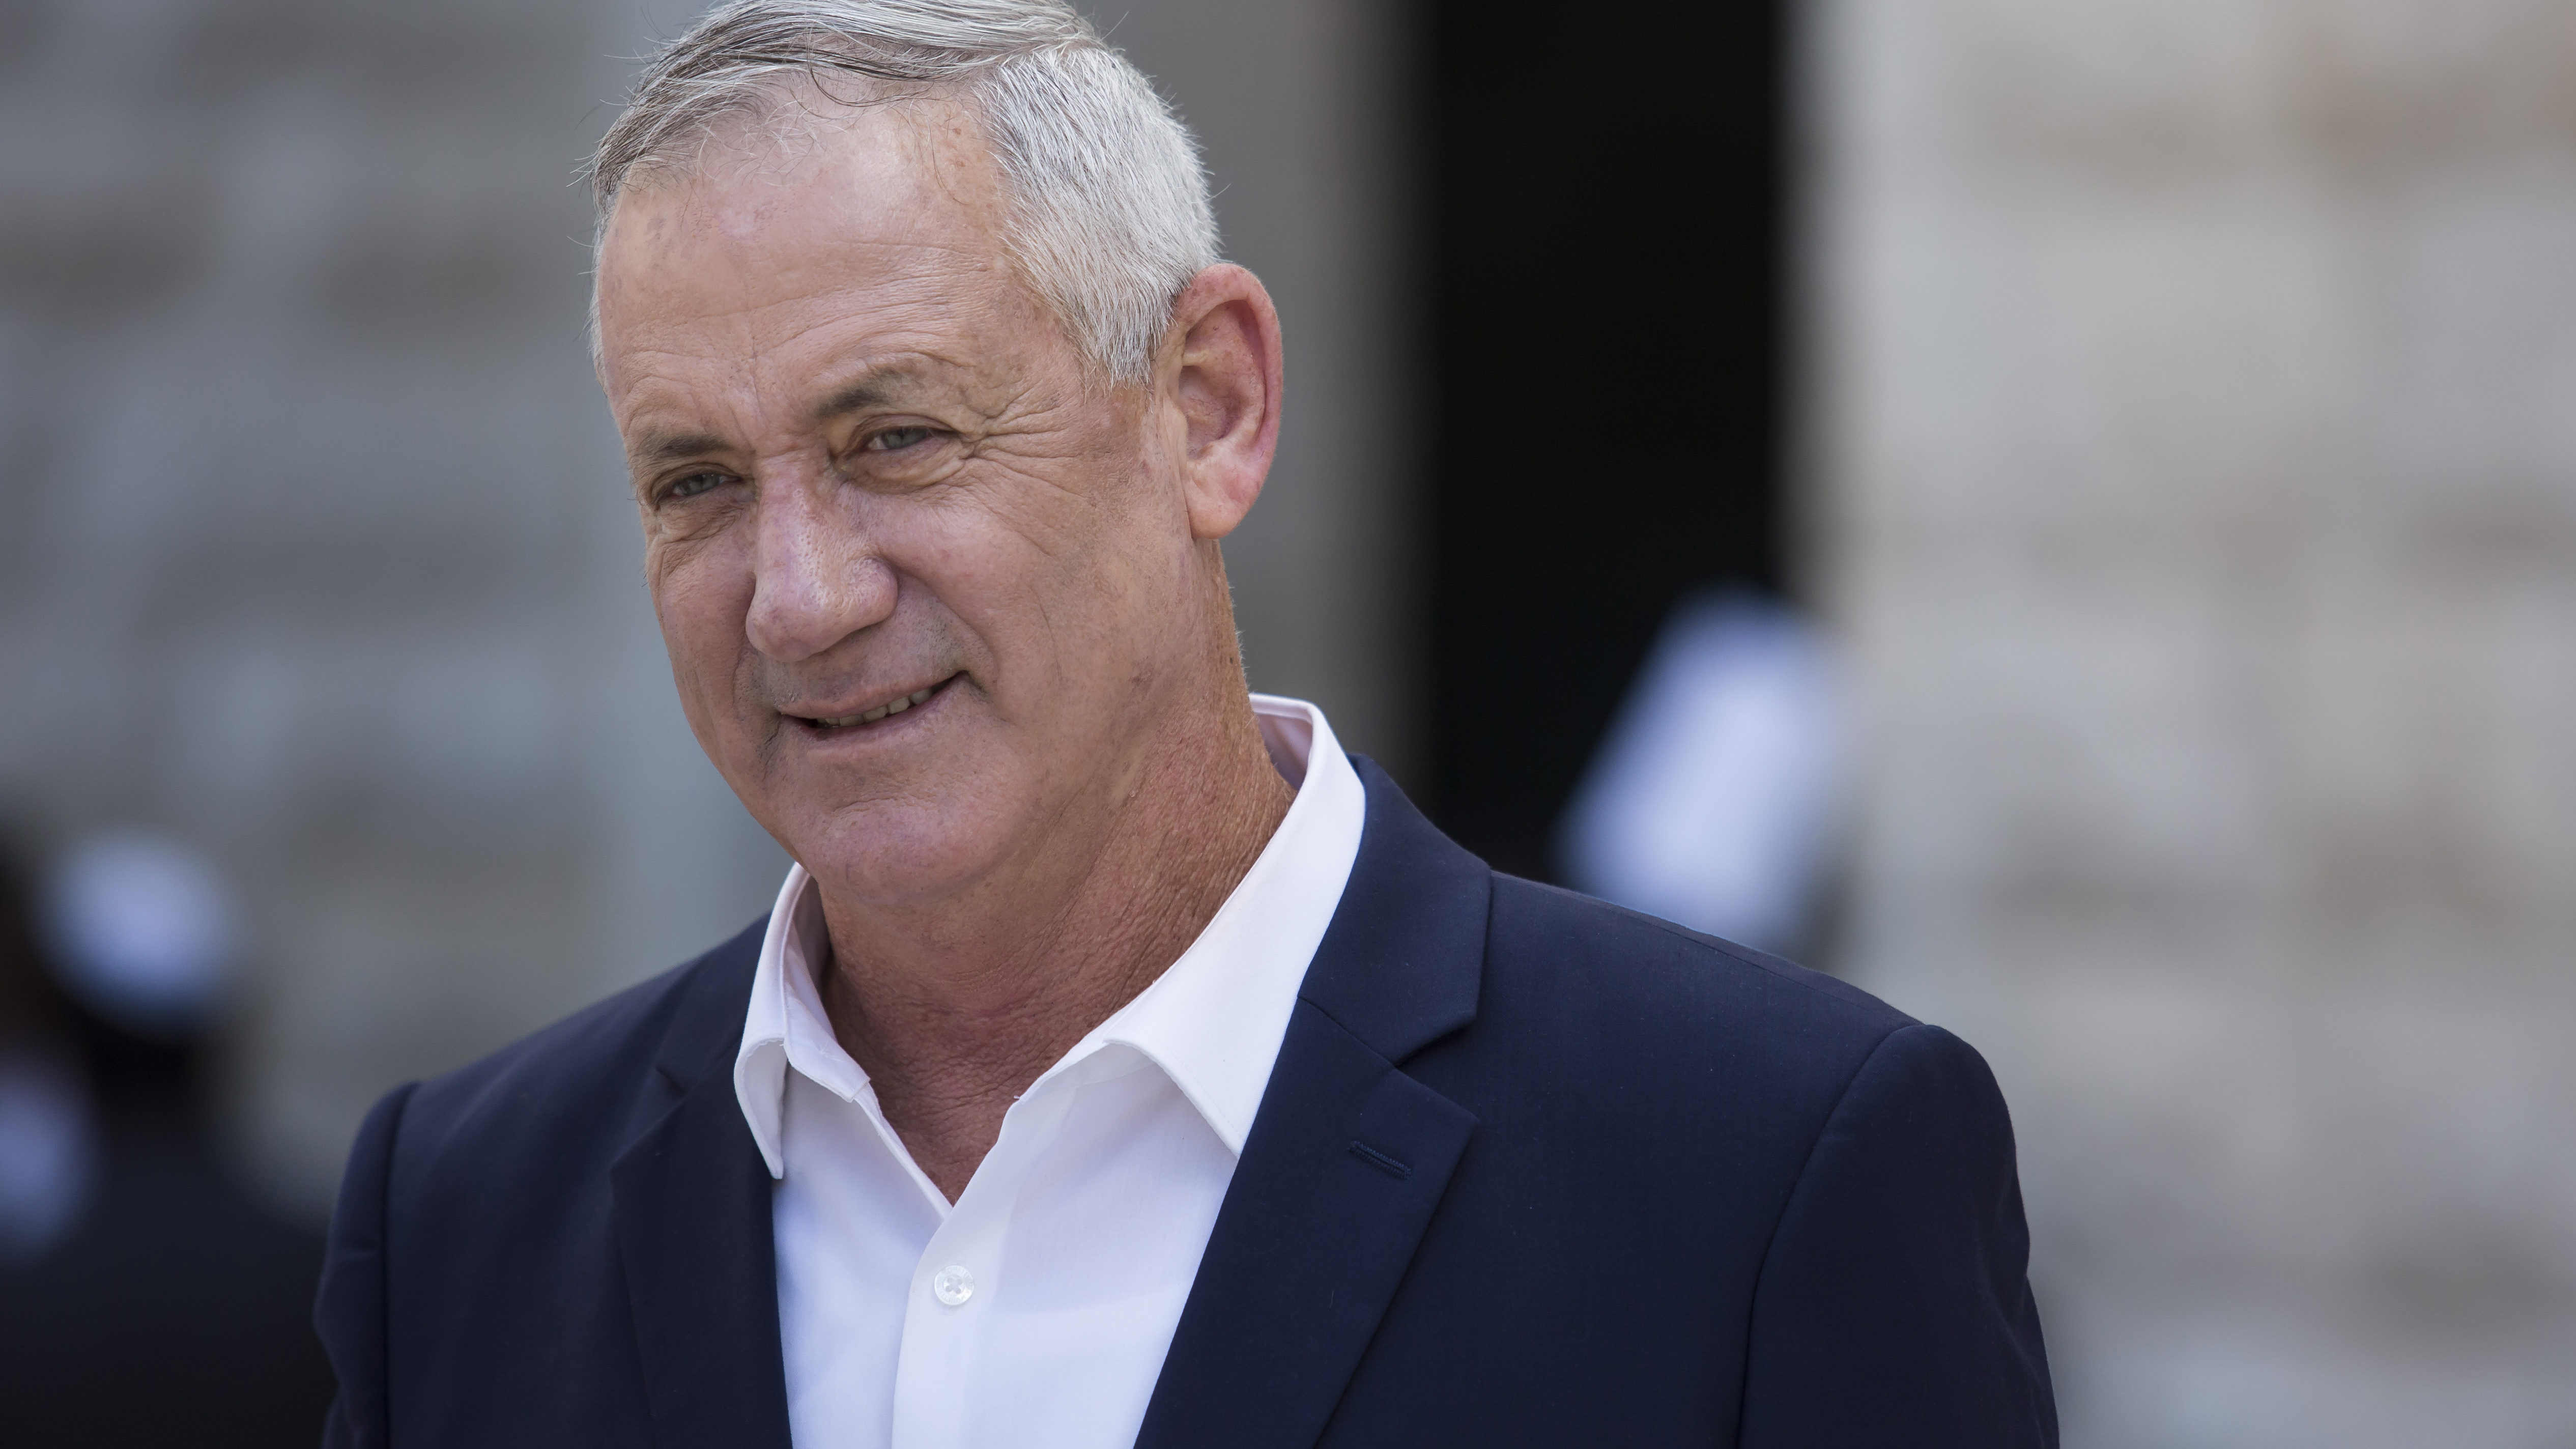 Israel’s Defense Minister Benny Gantz Makes Surprise Visit to Bahrain, Will Sign Arms Agreements